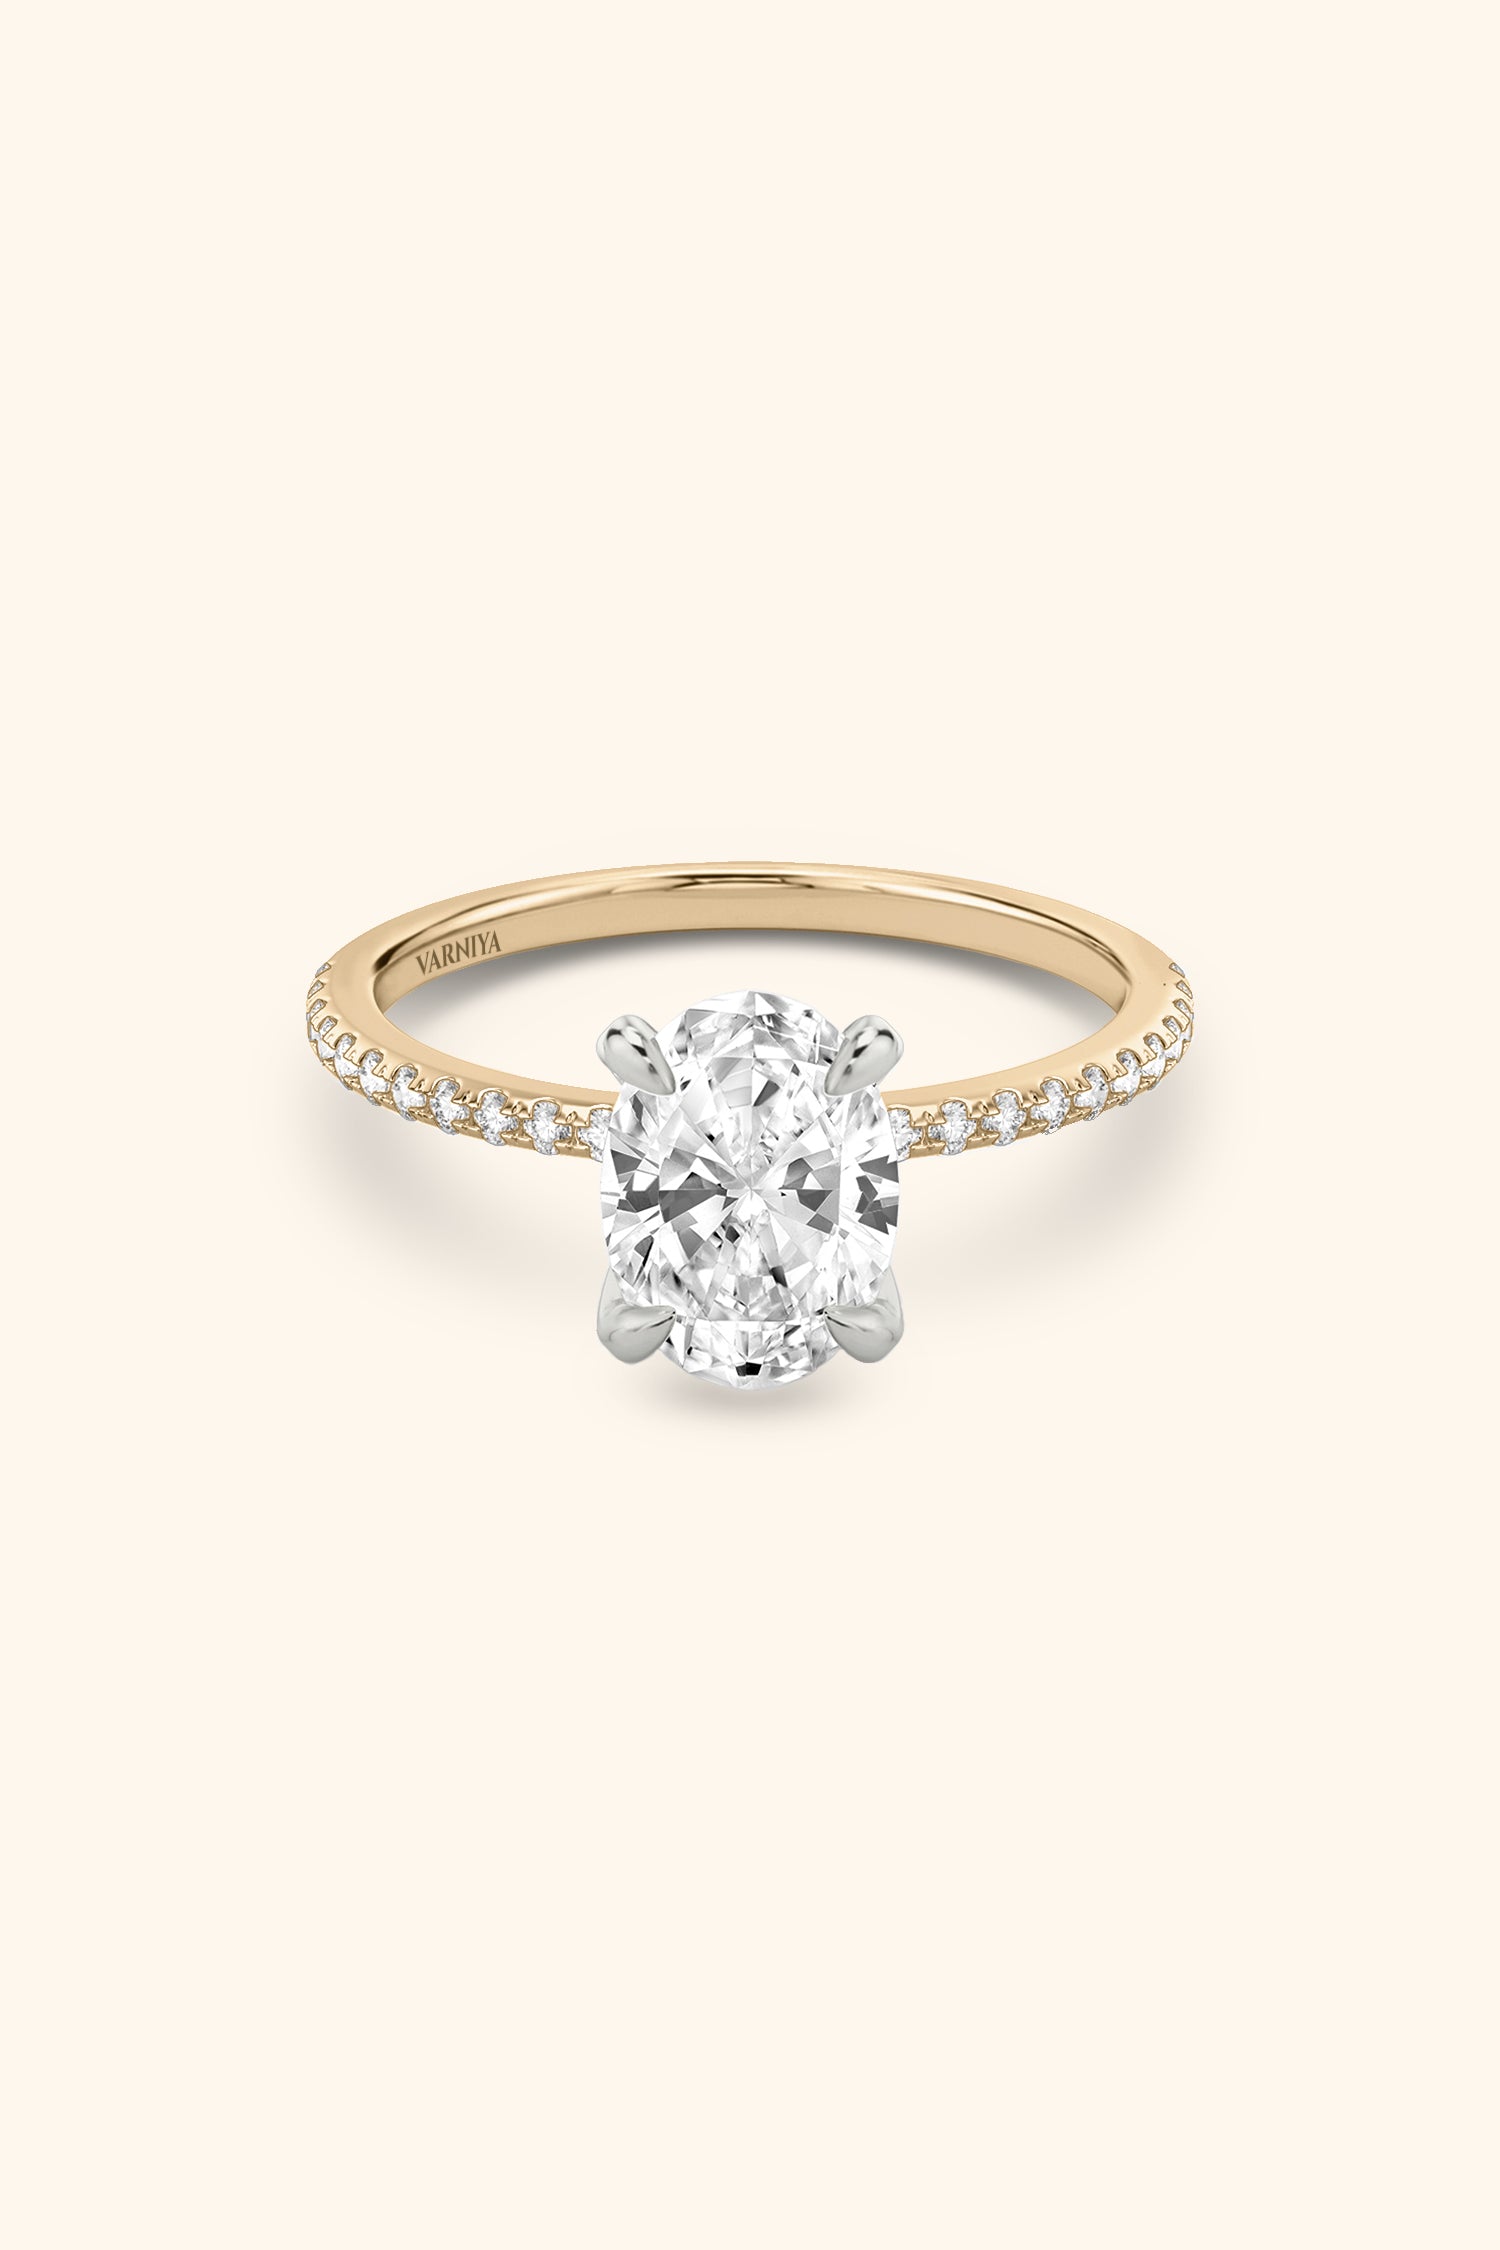 Dual Tone Glance Pavé Ring with Oval Solitaire